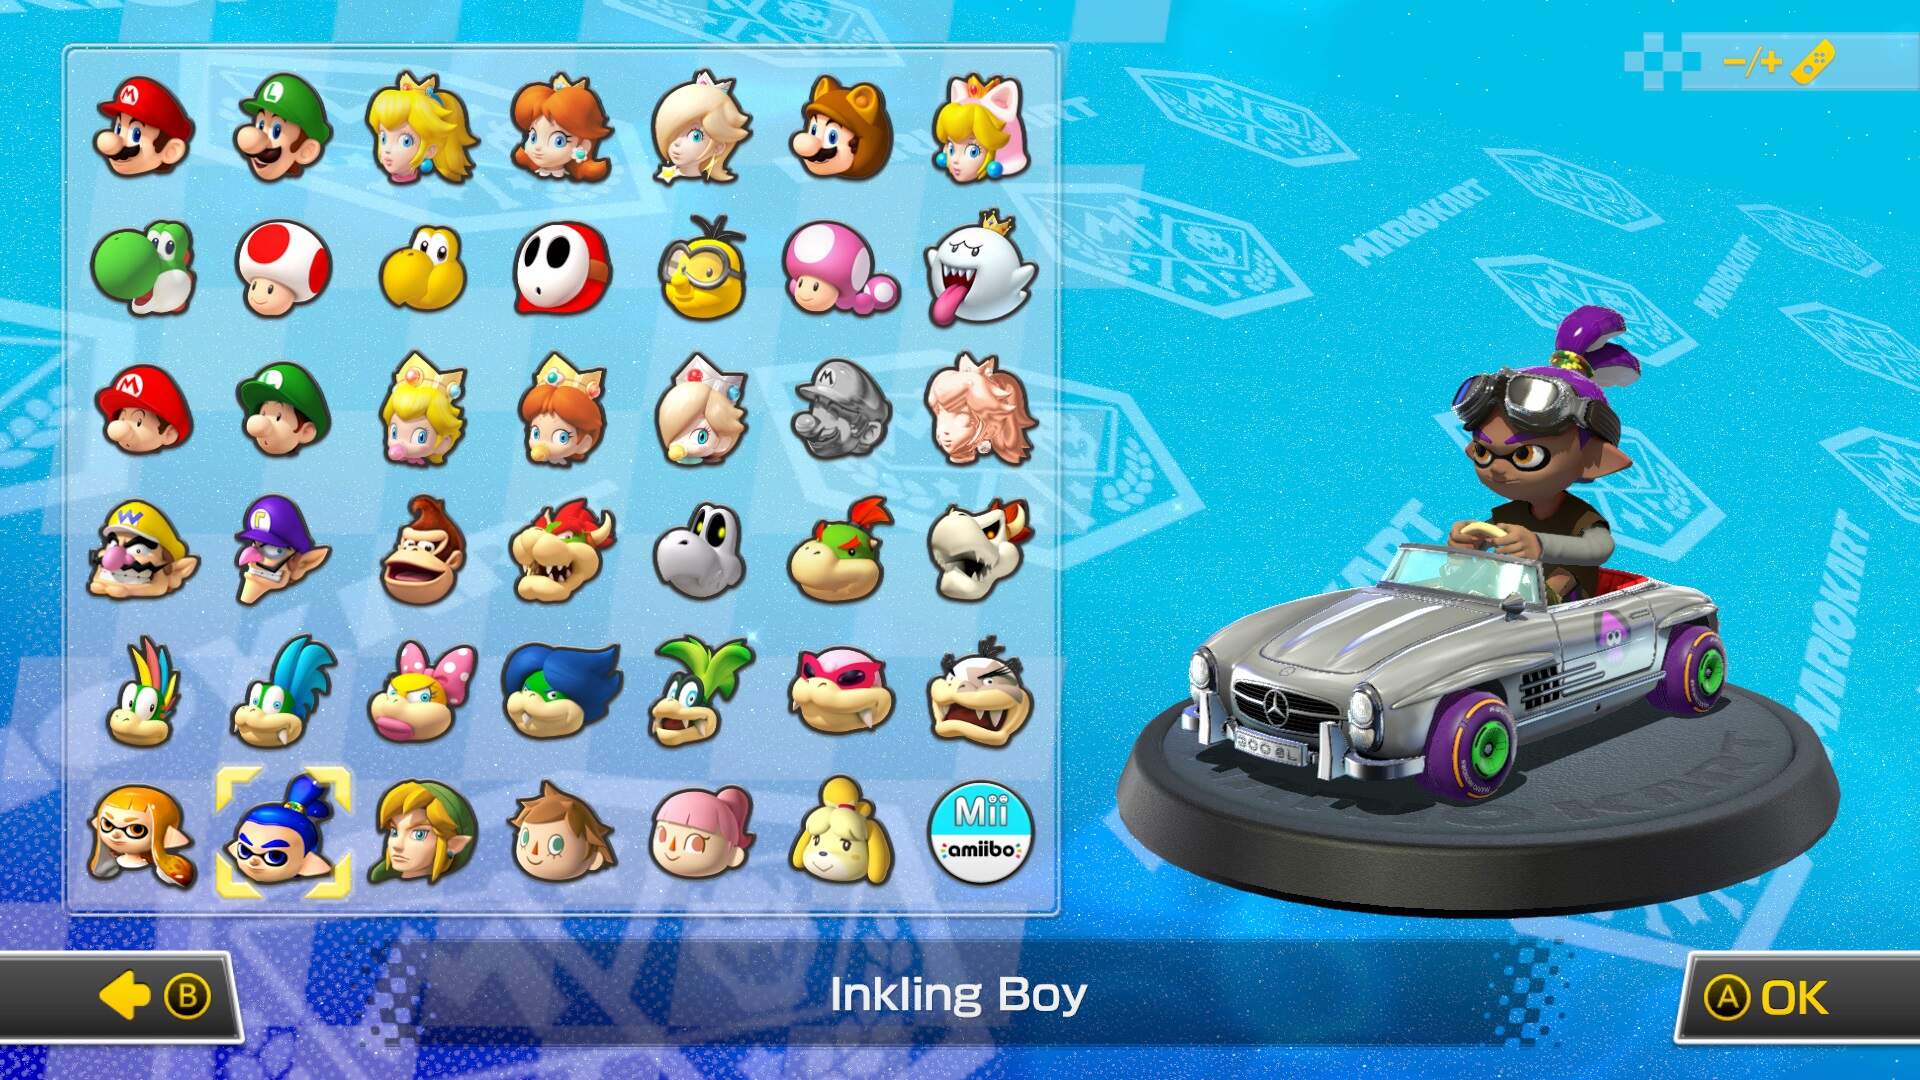 Best Characters to Build The Fastest Kart in Mario Kart 8 Deluxe